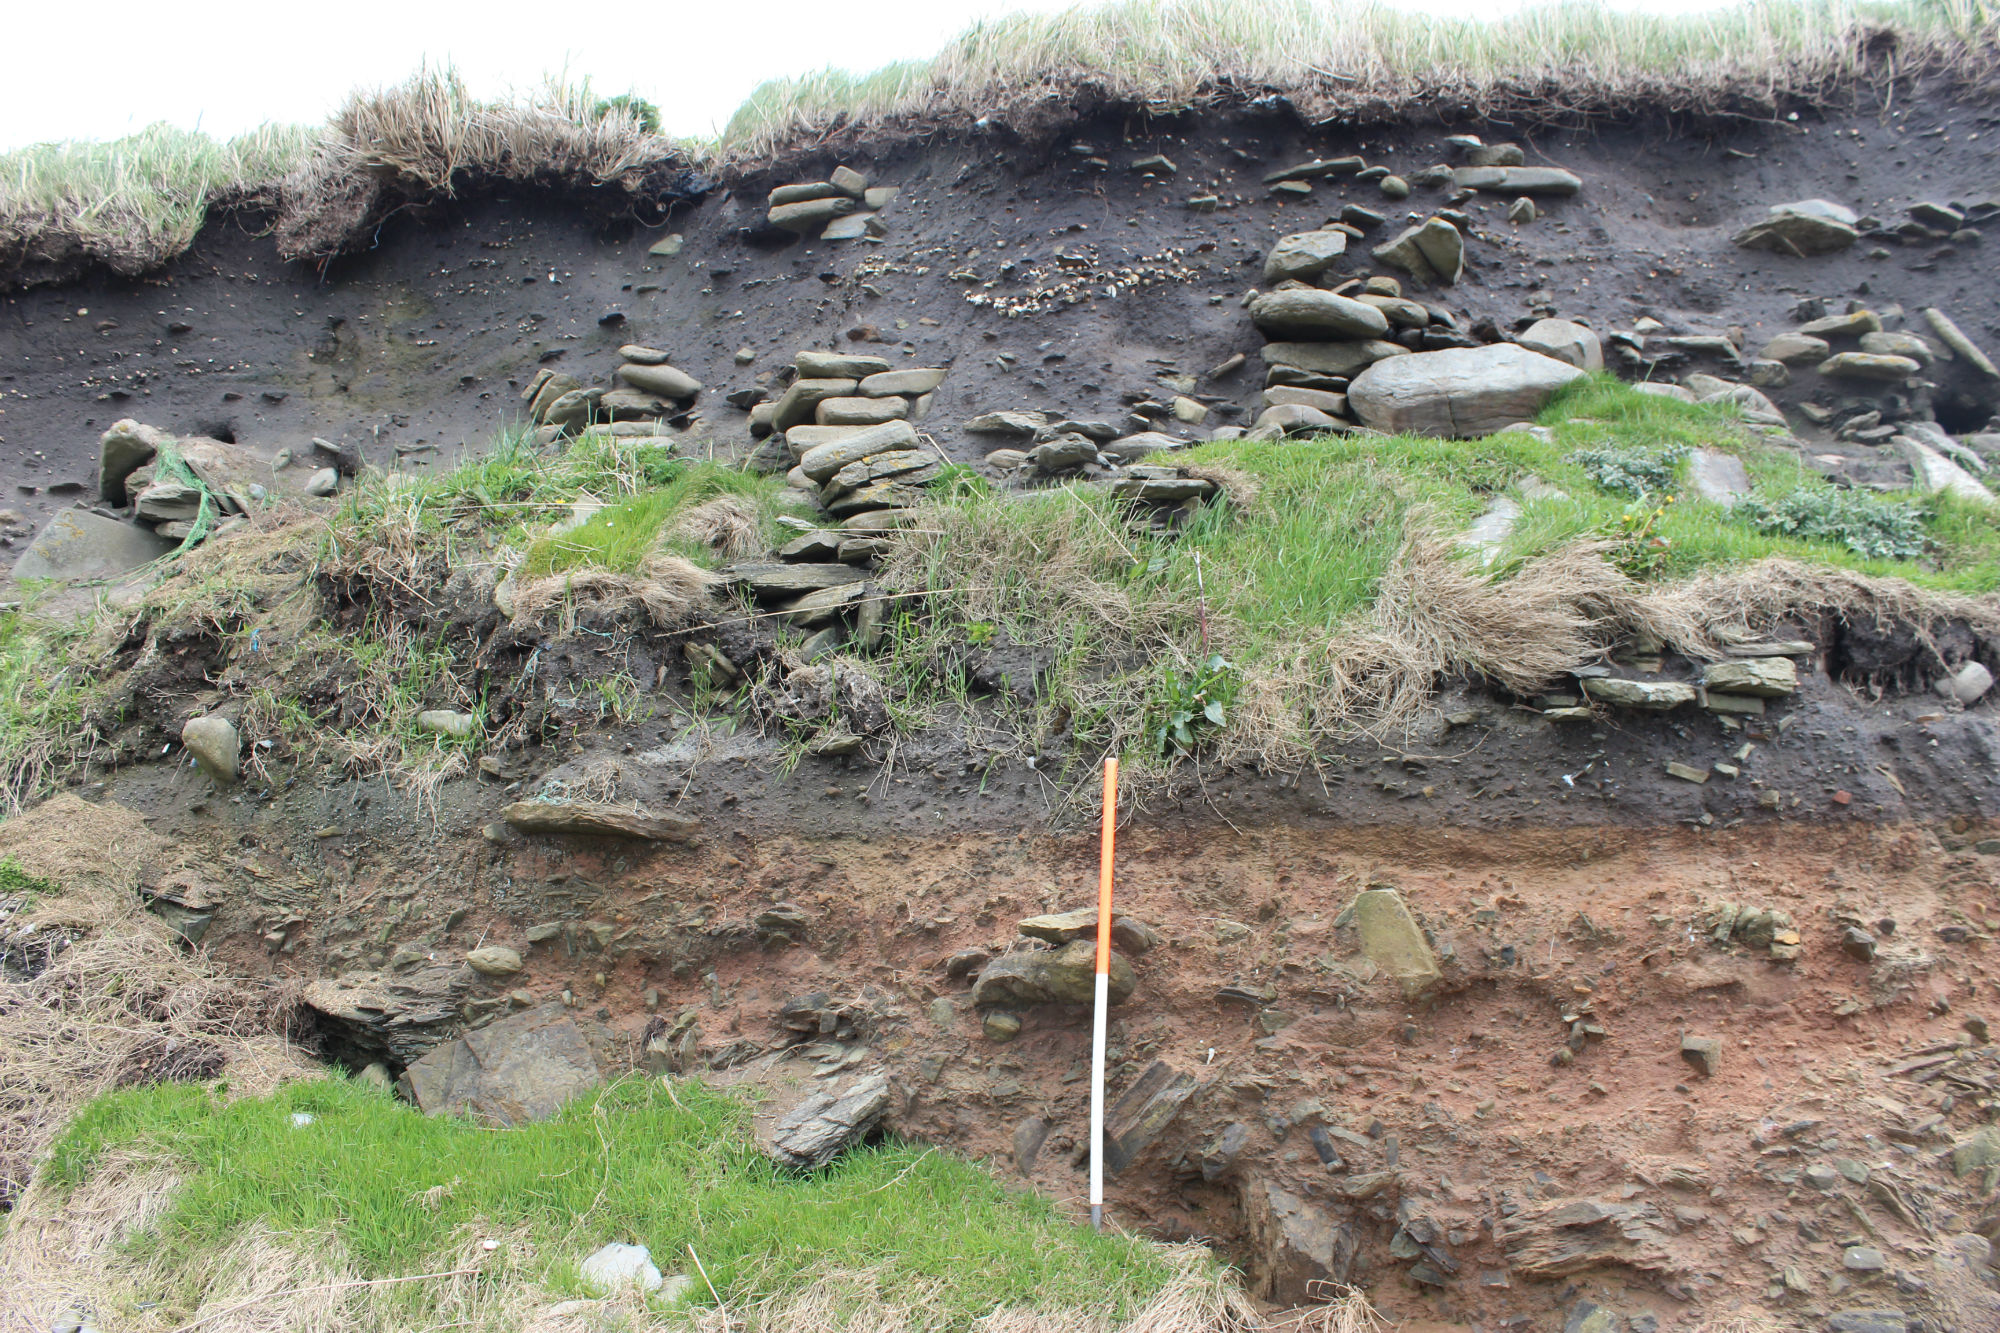 King\'s Craig structural remains and midden at north end of section